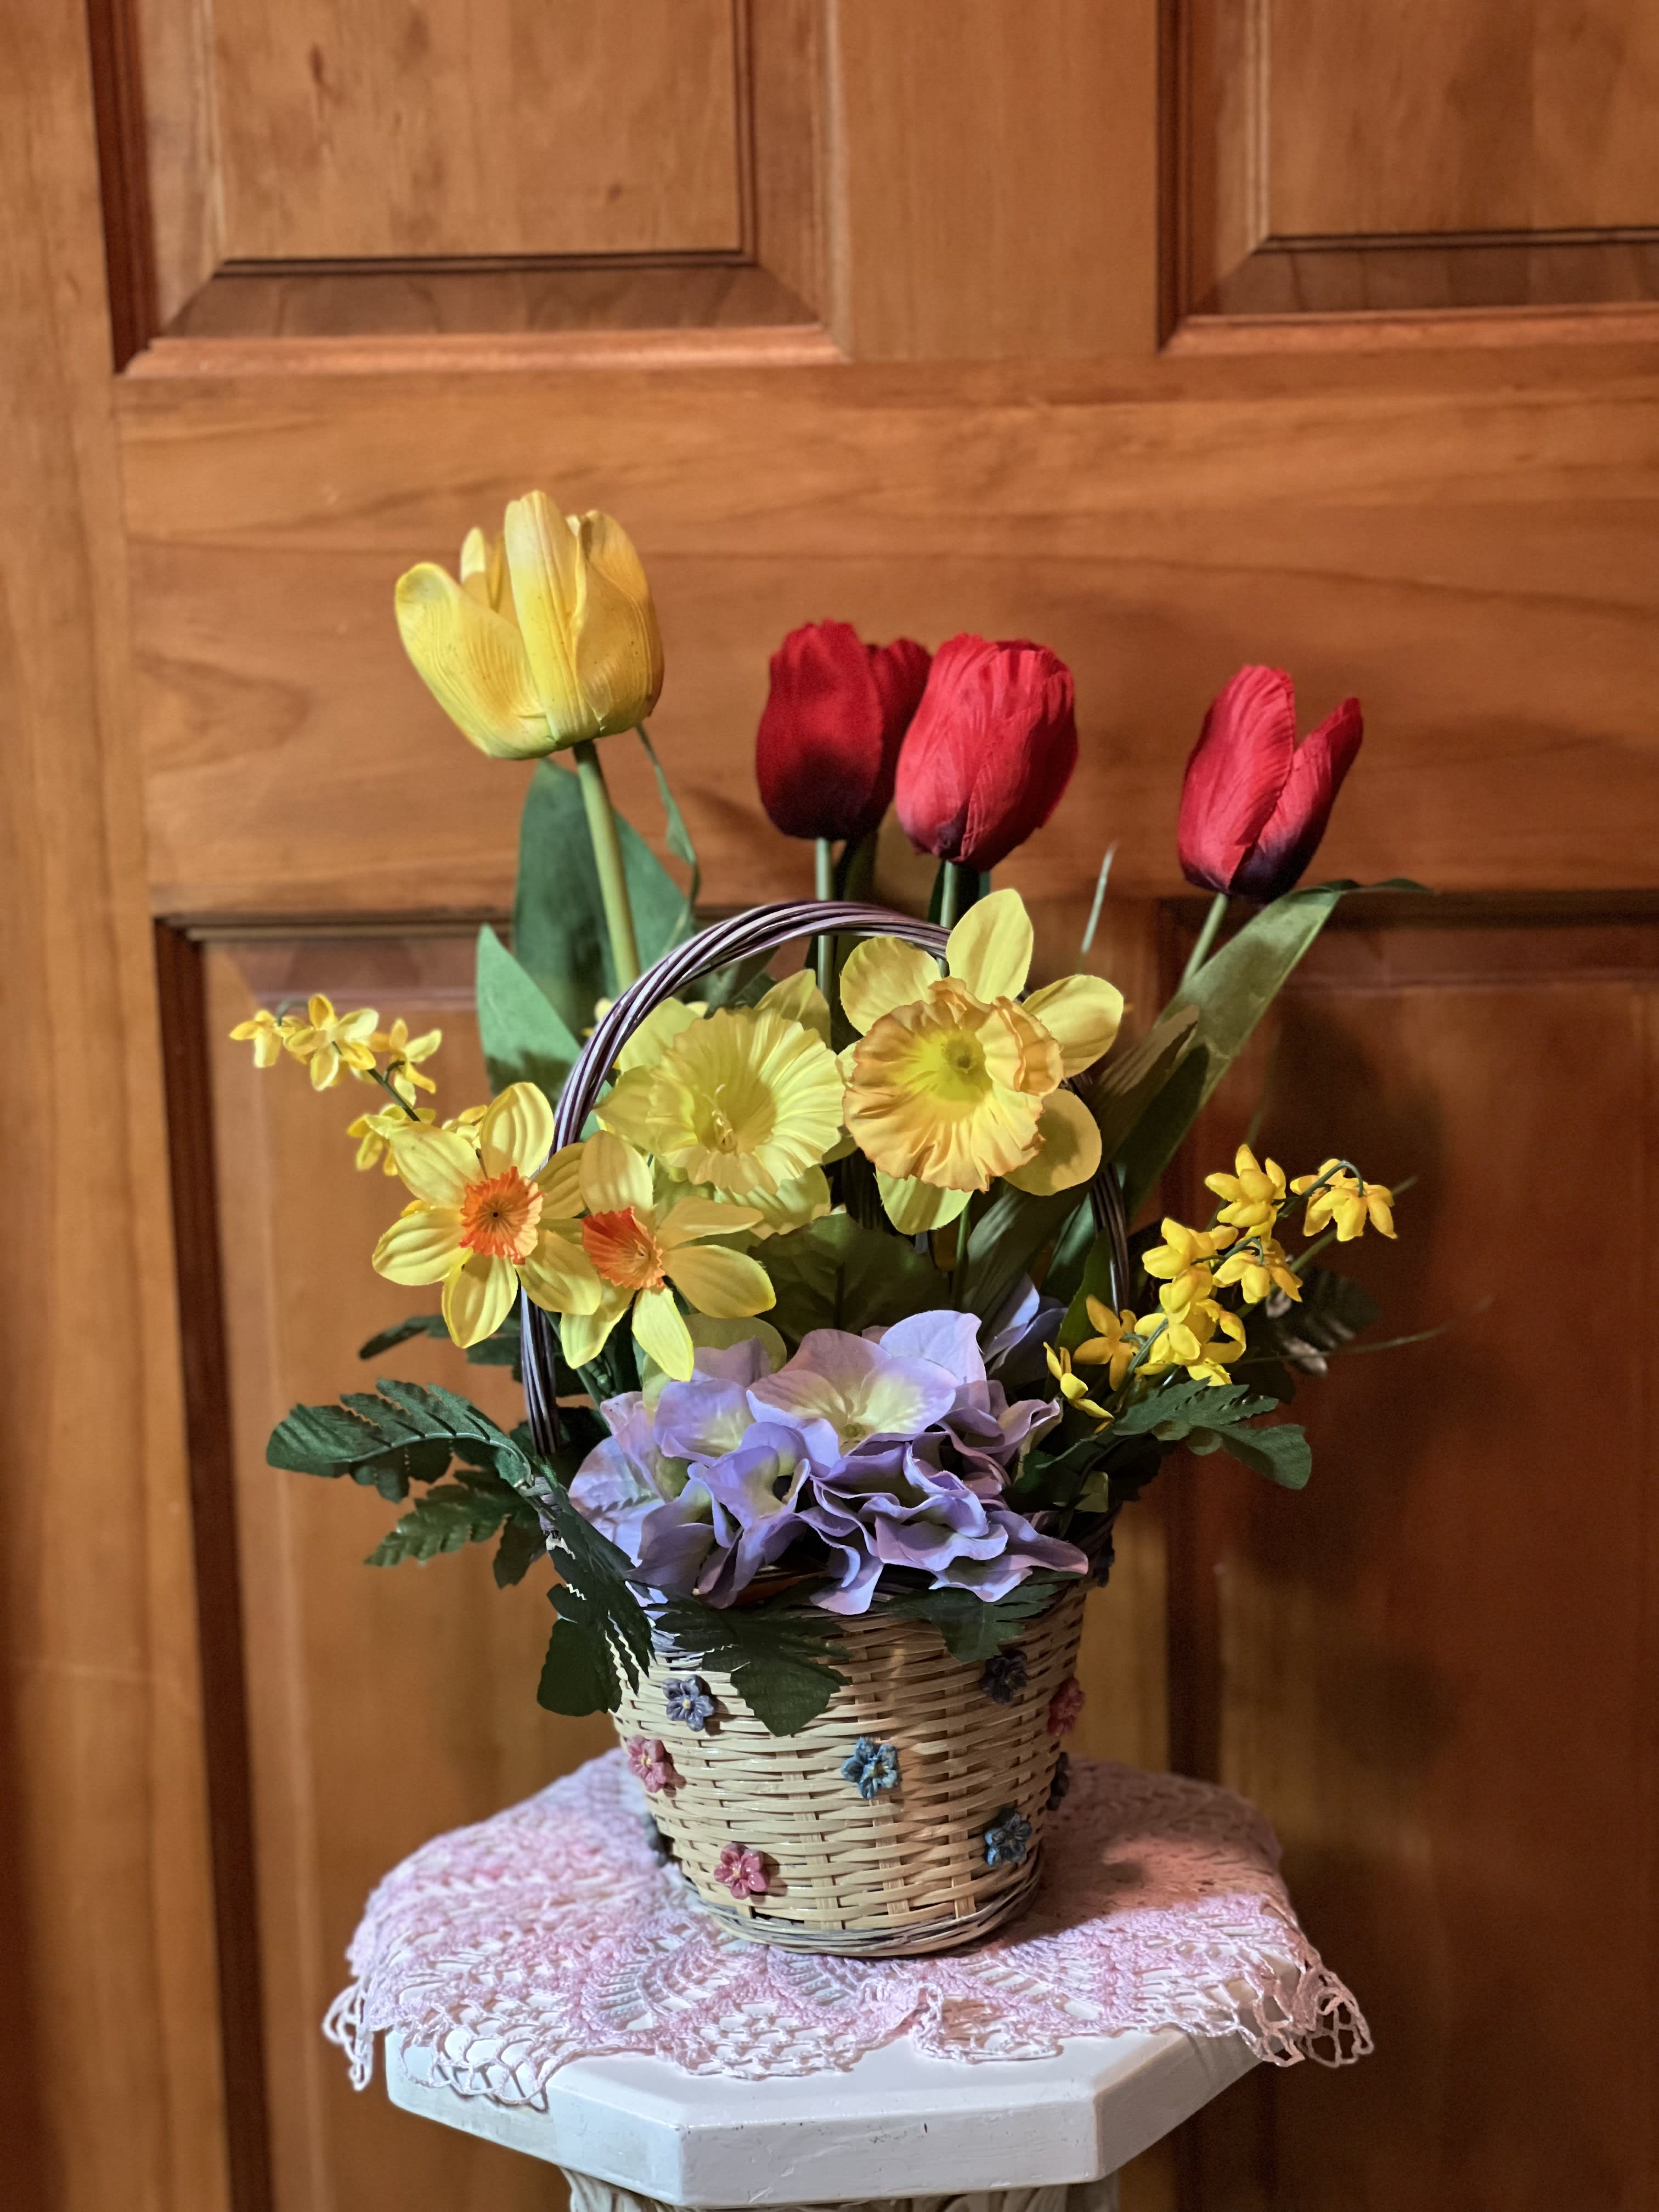 Permanent Spring's Blooms  - A keepsake arrangement to be proudly brought out every Spring. Wonderful yellow and red lifelike silk tulips. Silk soft lavender hydrangea and cute little daffodils round out this design. Sure to become a treasured gift. Cuddled into a whitewash basket trimmed with dainty flowers. Approximate size of basket: 5&quot; X 4&quot; X 11&quot; tall.  Silk Flowers rise above the basket to look like they are growing. 